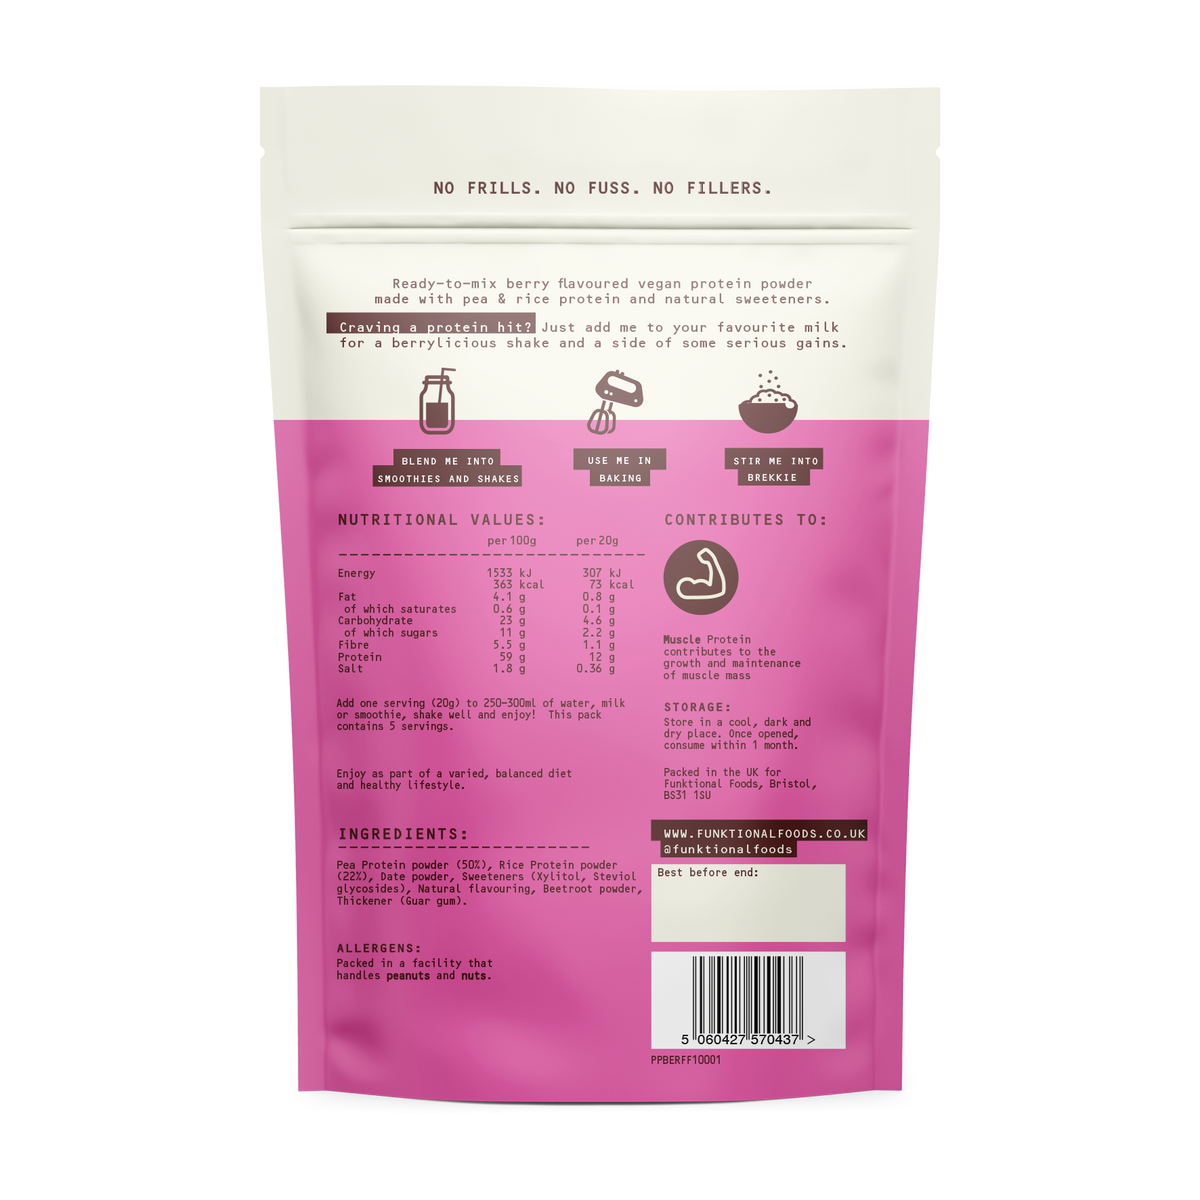 Funktional Foods Protein Blend Berry (100G)